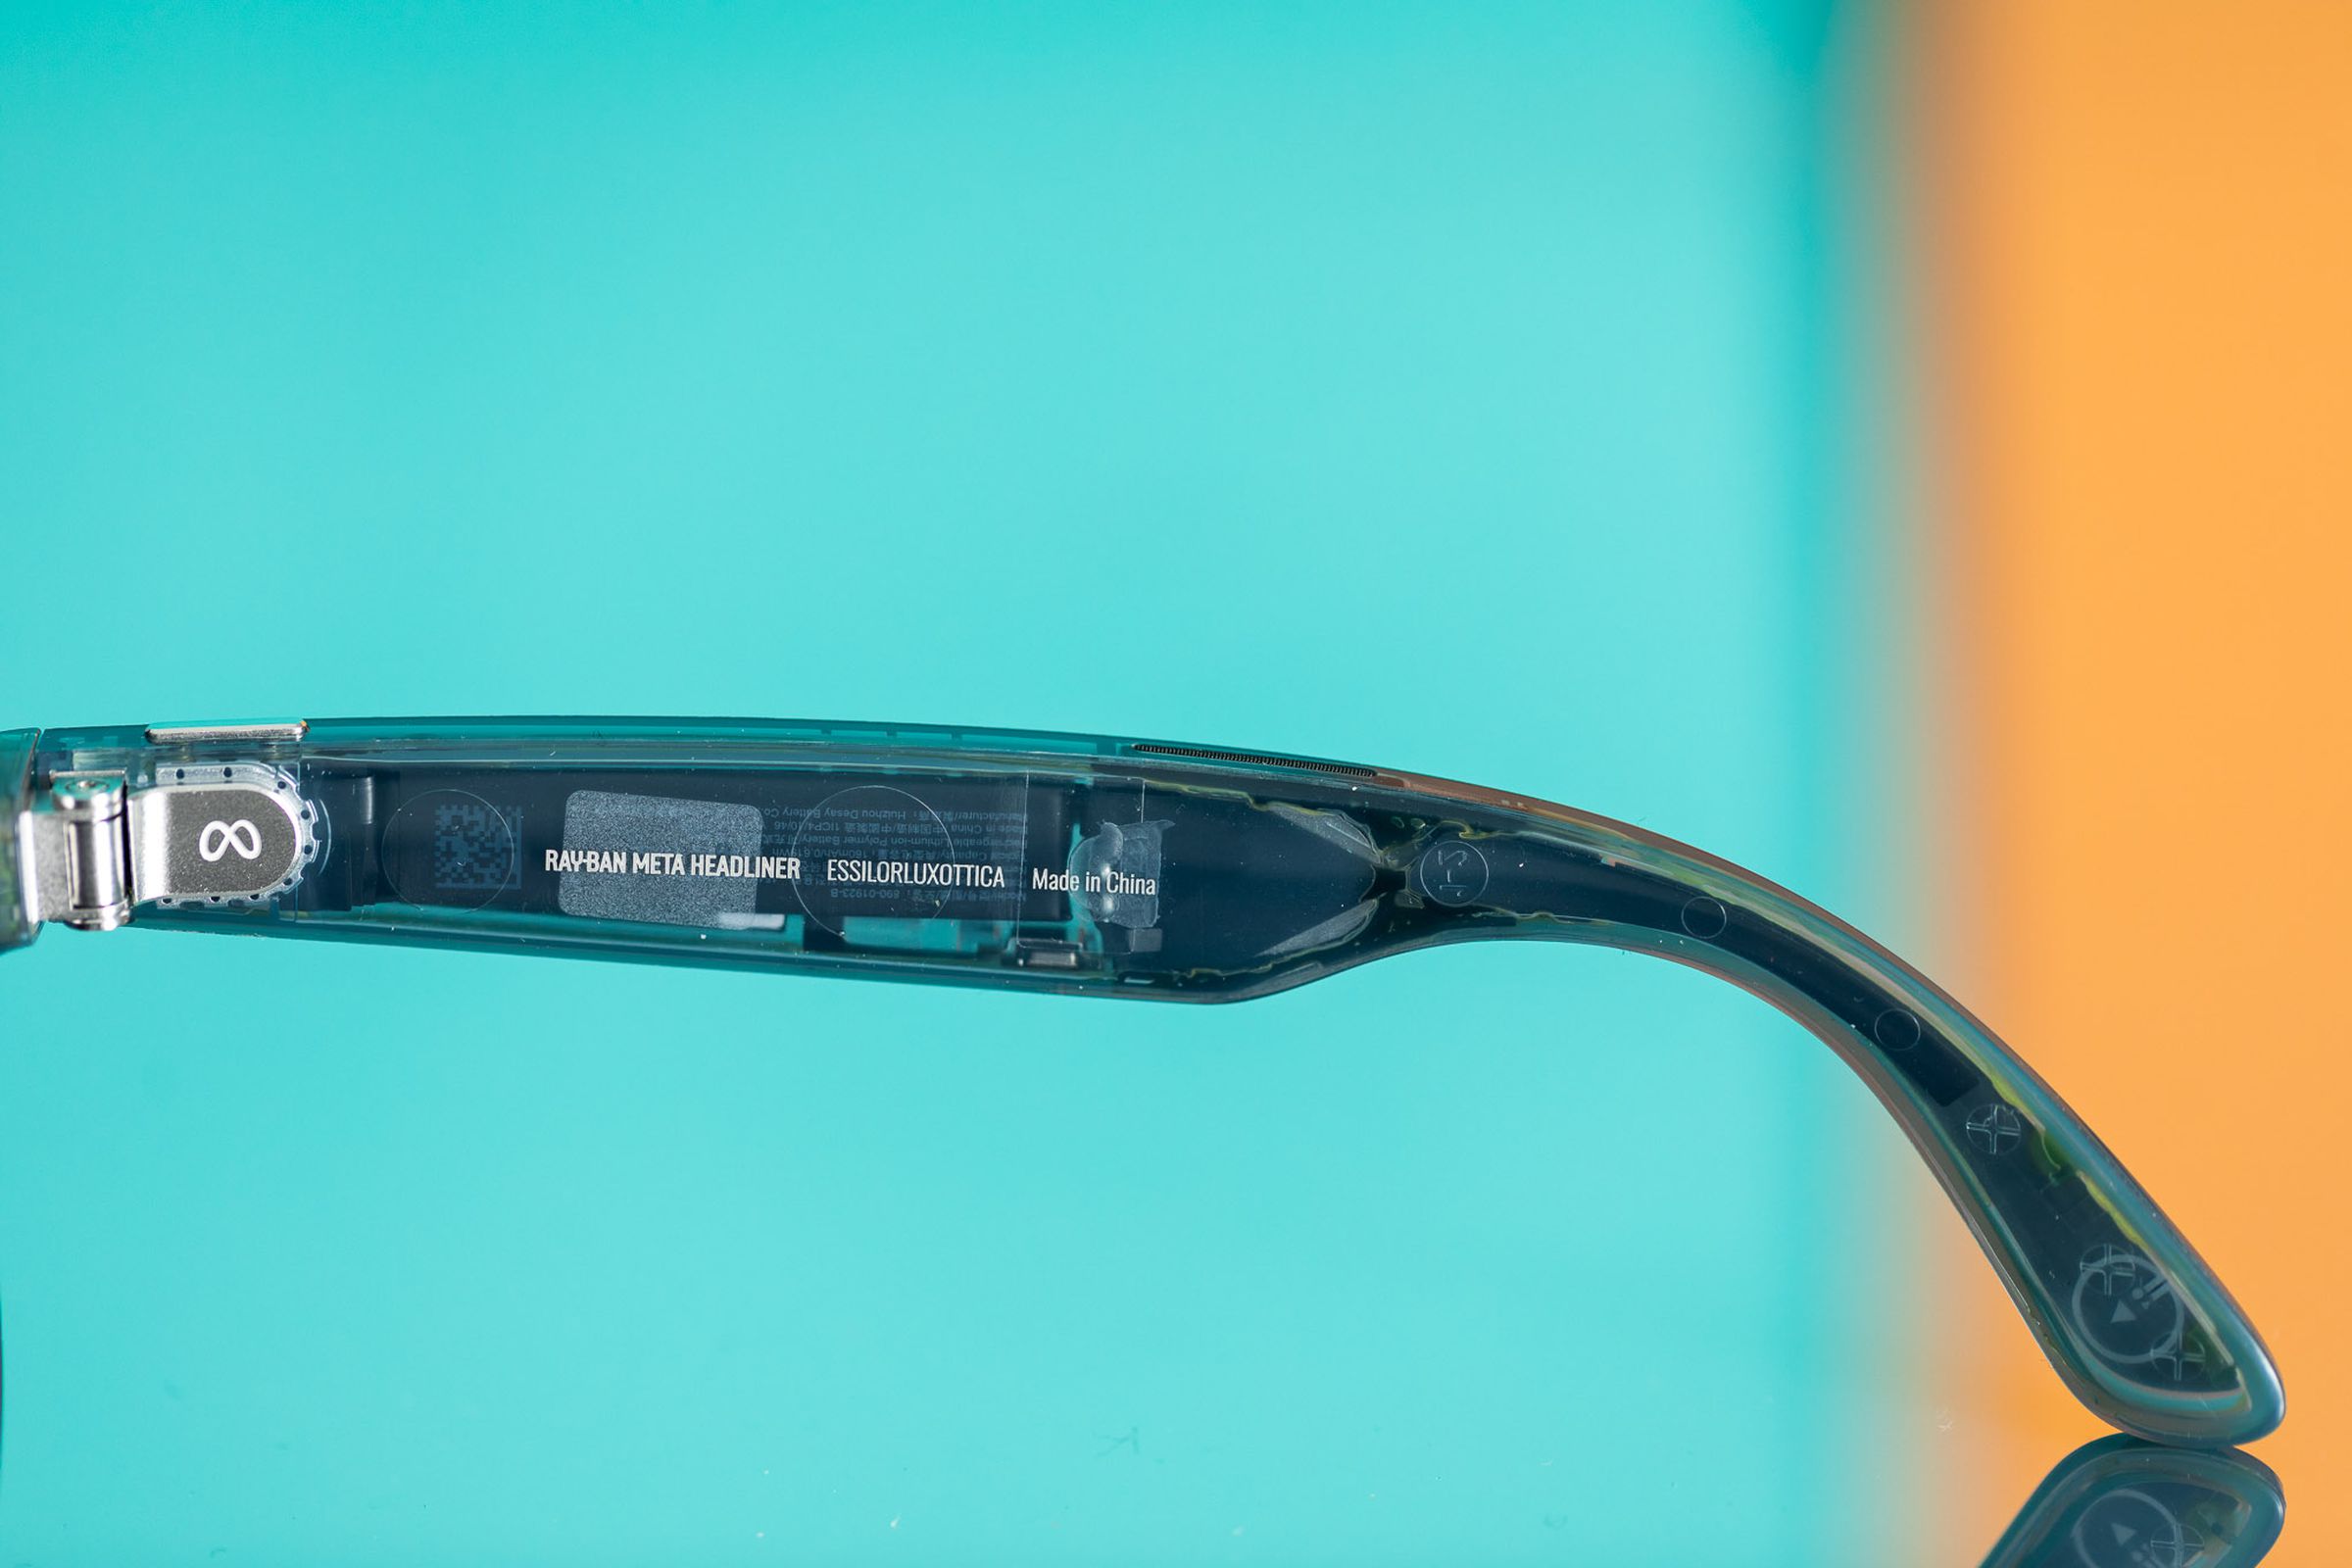 Transparent arm showing the internal components of the Ray-Ban Meta Smart Glasses